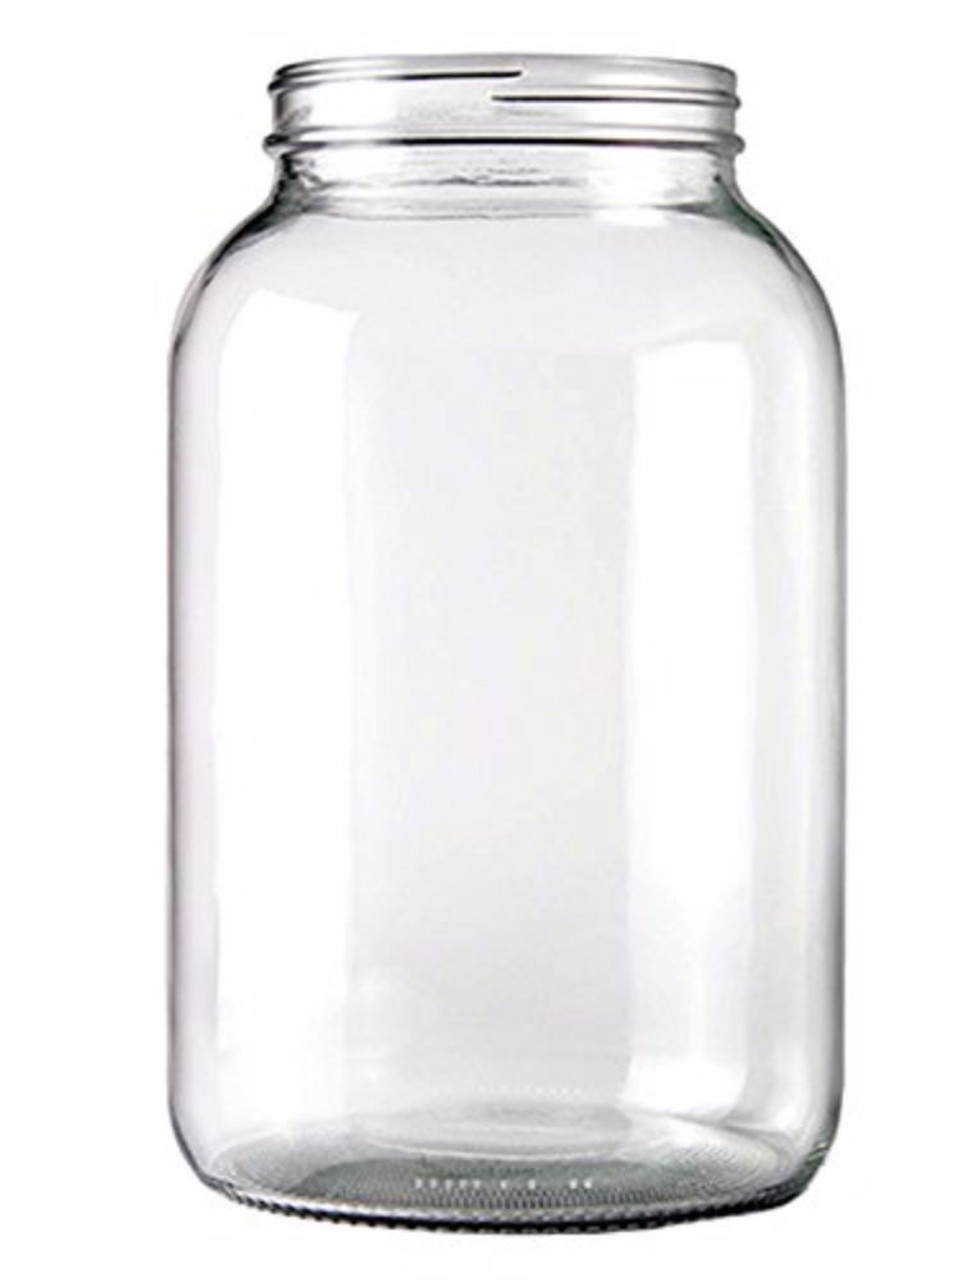 Home Brew Ohio One Gallon Wide Mouth Glass Jar with Grommeted Lid